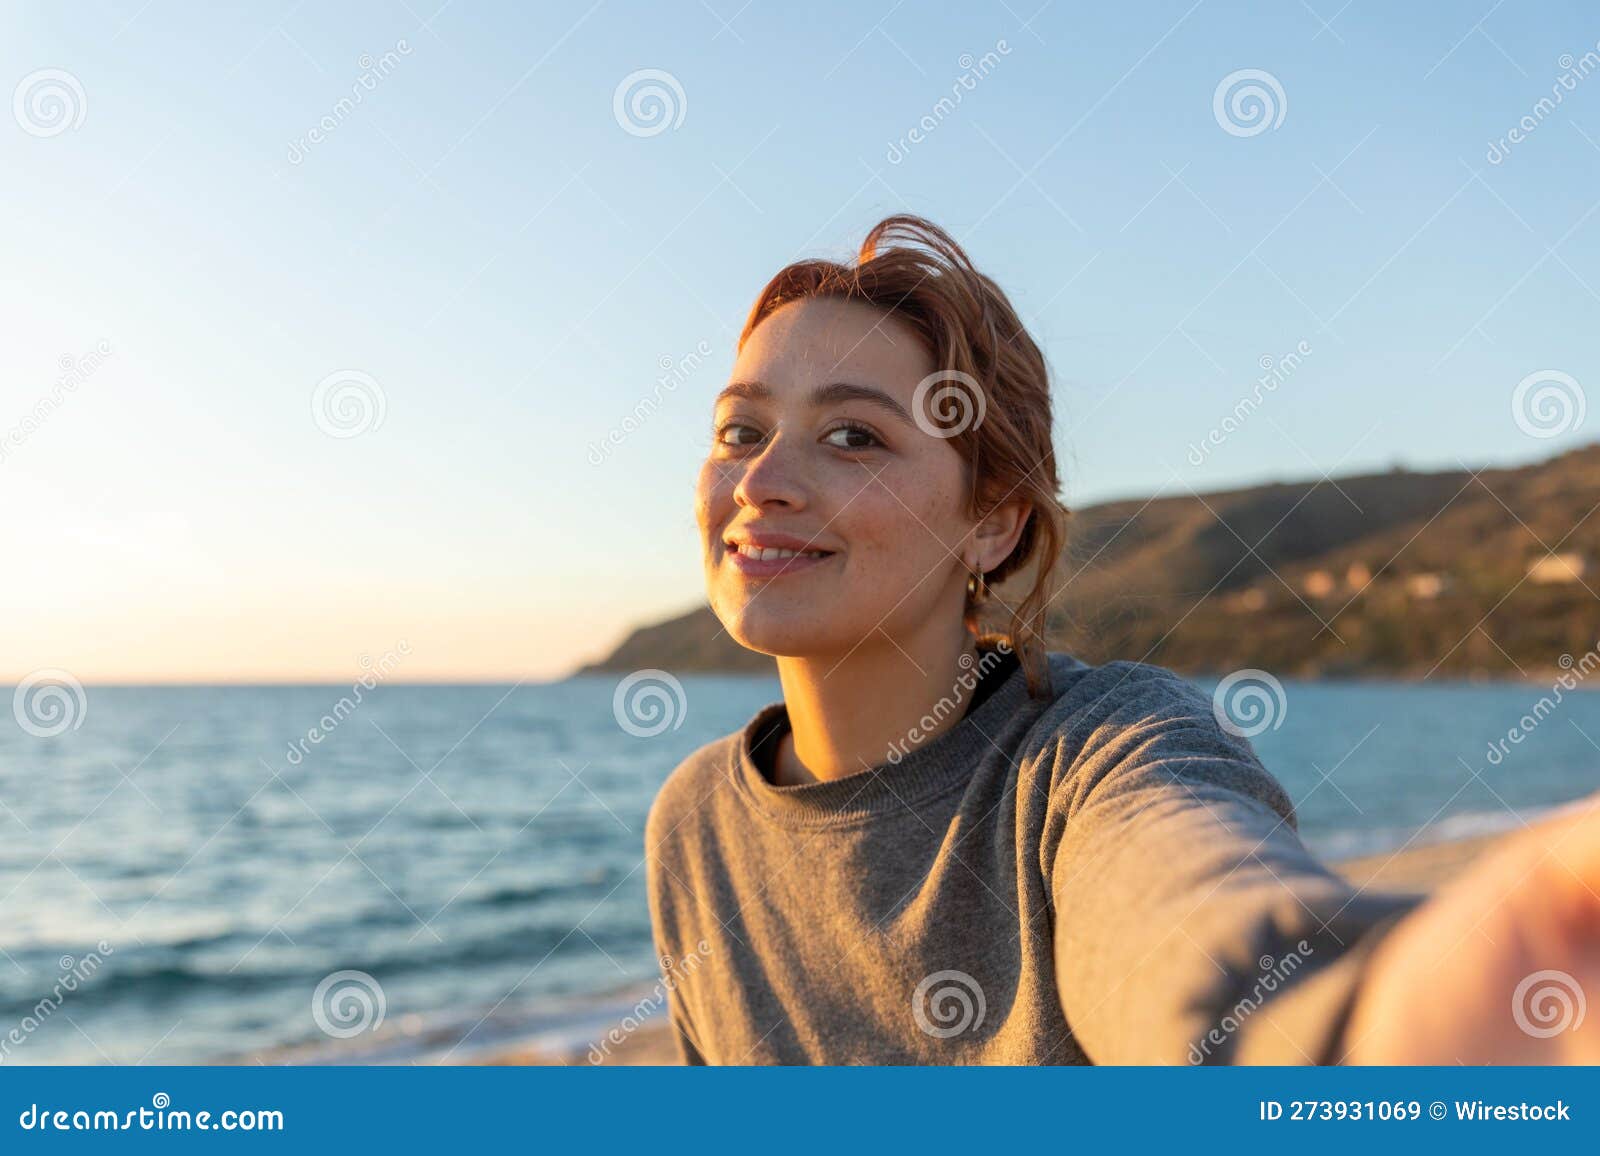 Redhead Woman Taking A Selfie On The Beach Stock Image Image Of Cheerful Attractive 273931069